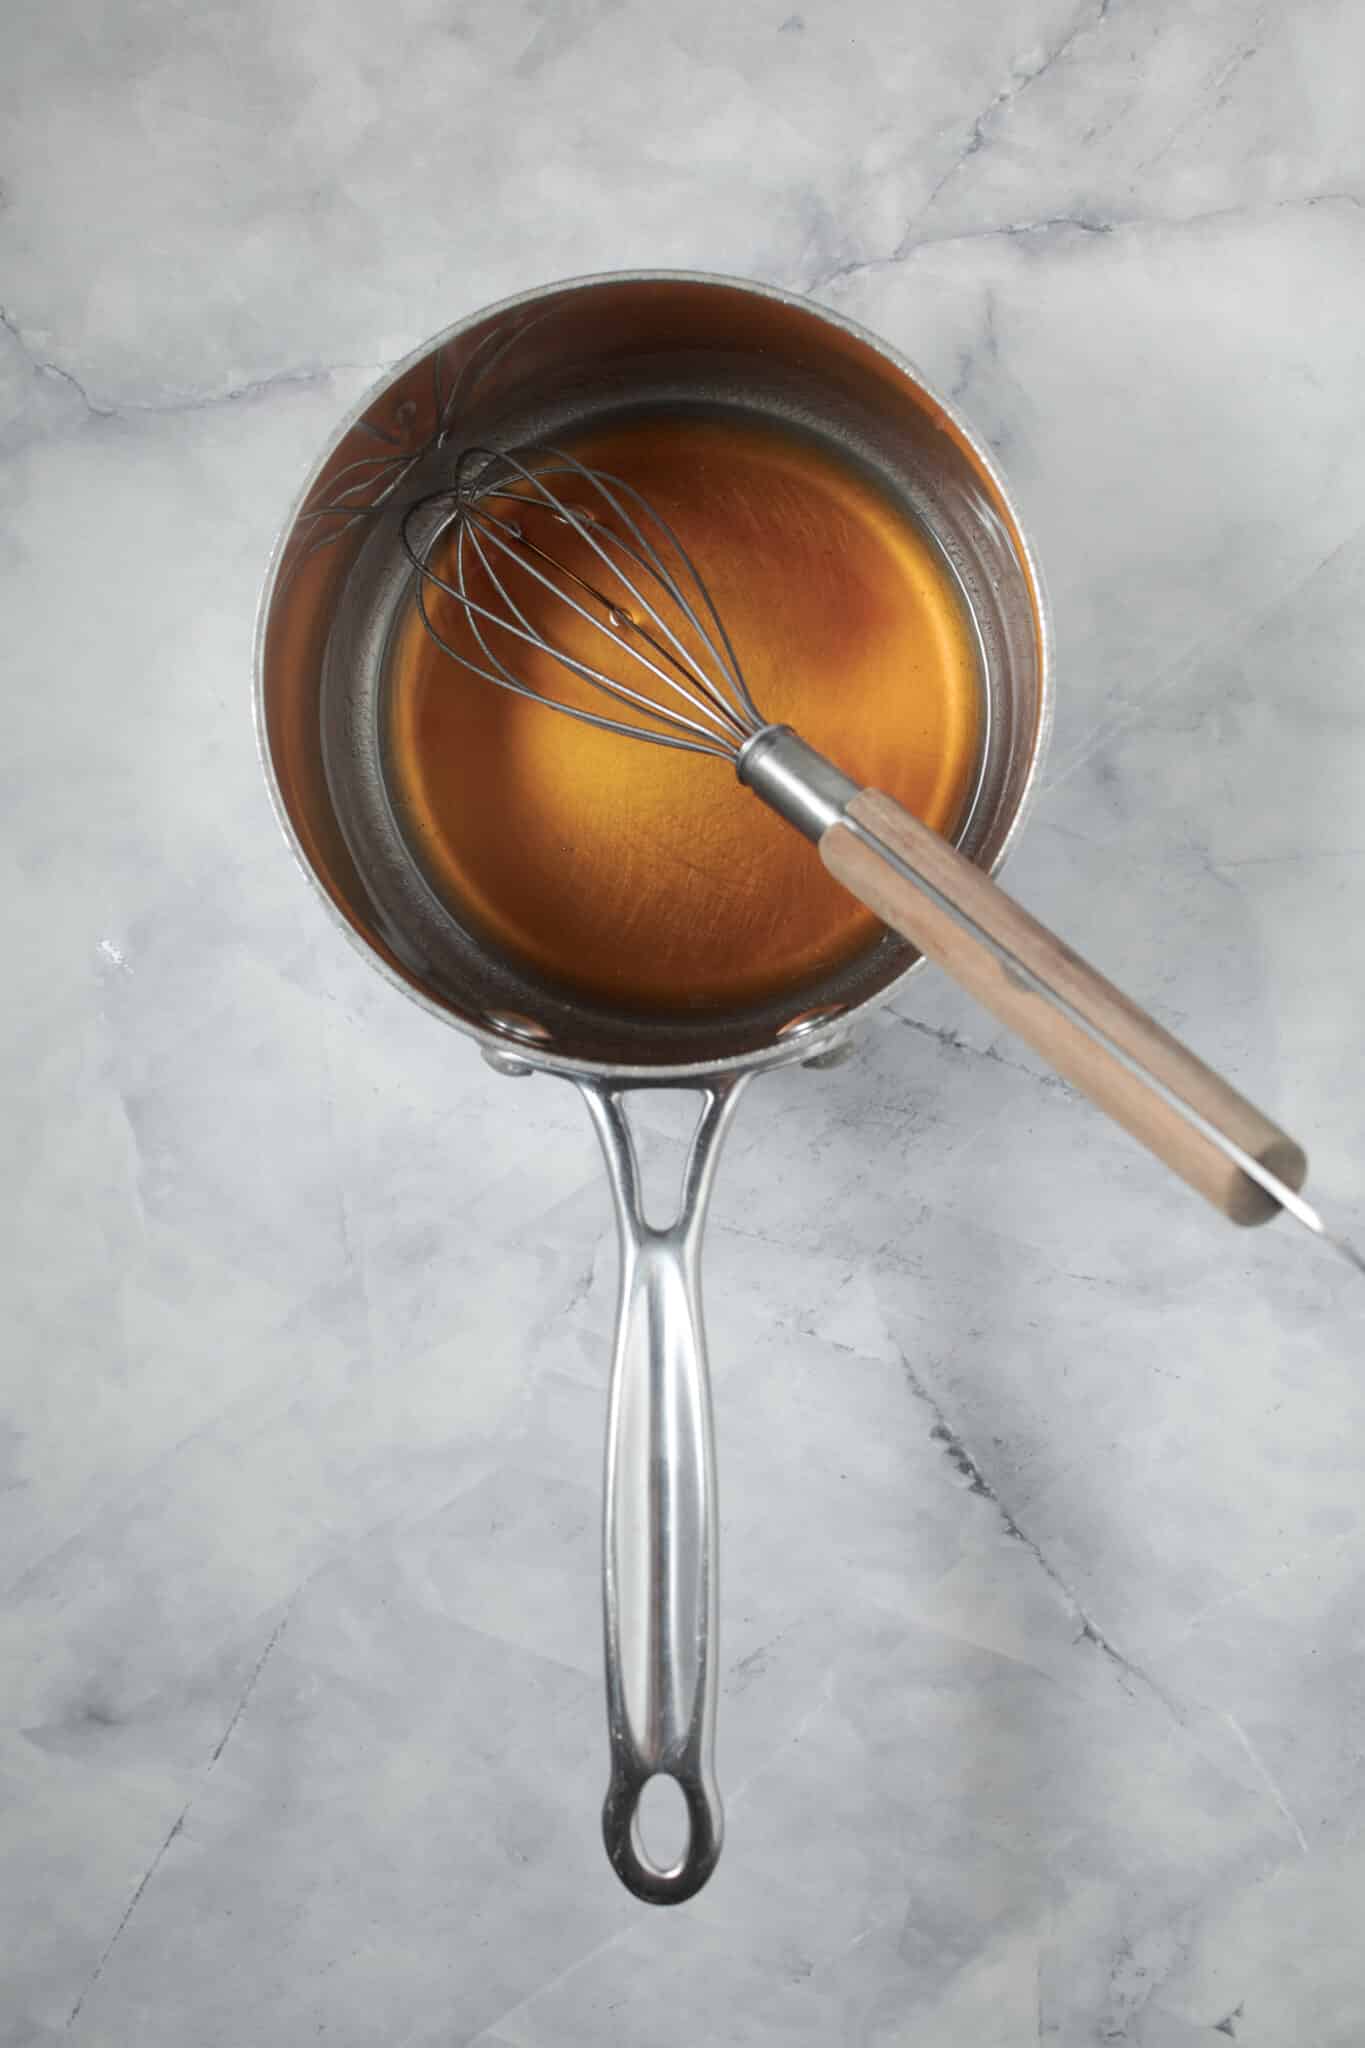 photo of the coconut oil and maple syrup whisked together in the saucepan